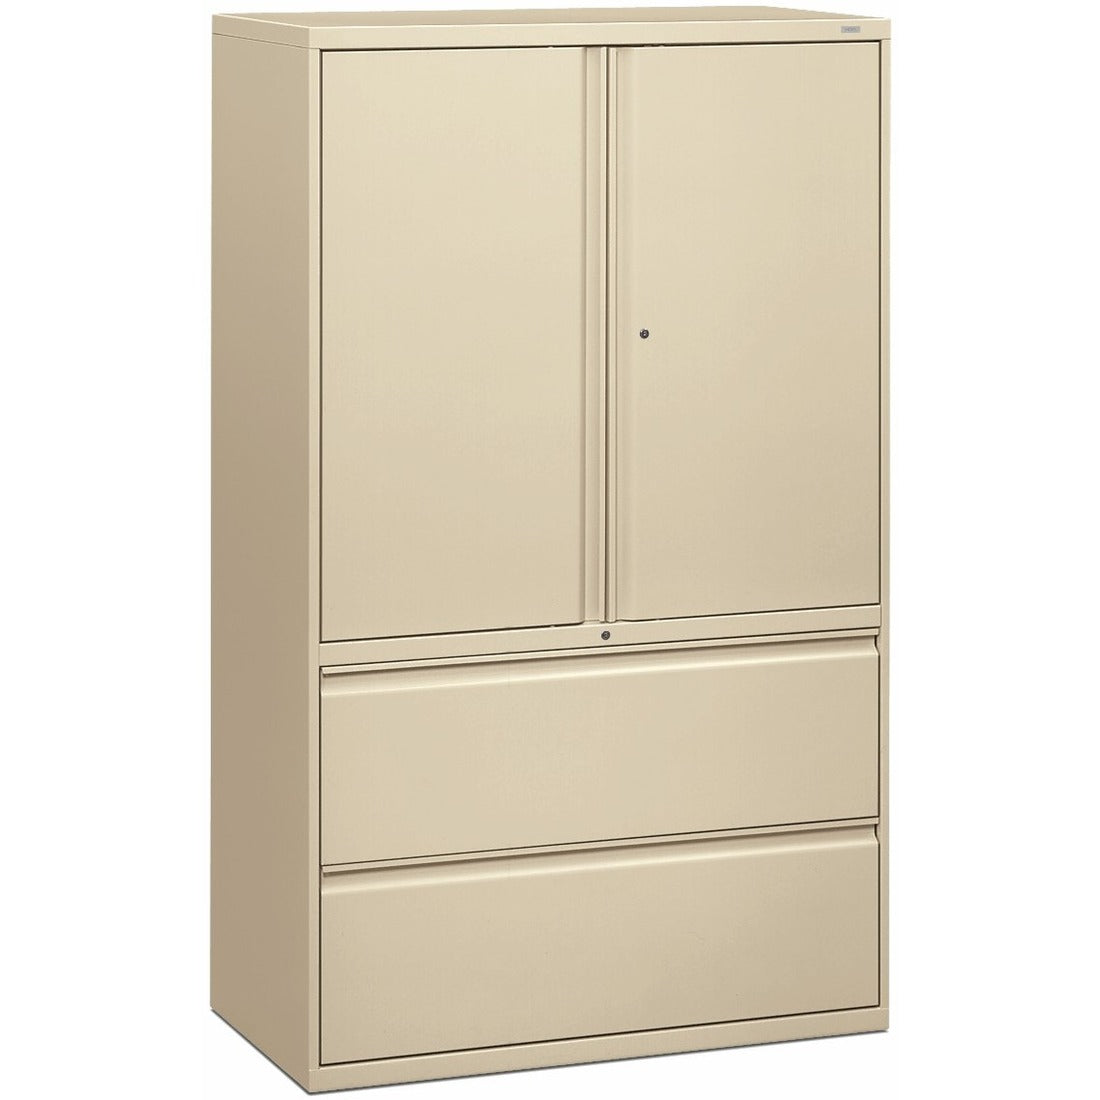 HON Brigade 800 H895LS Lateral File - 42" x 18"67" - 2 Drawer(s) - 3 Shelve(s) - Finish: Putty - 